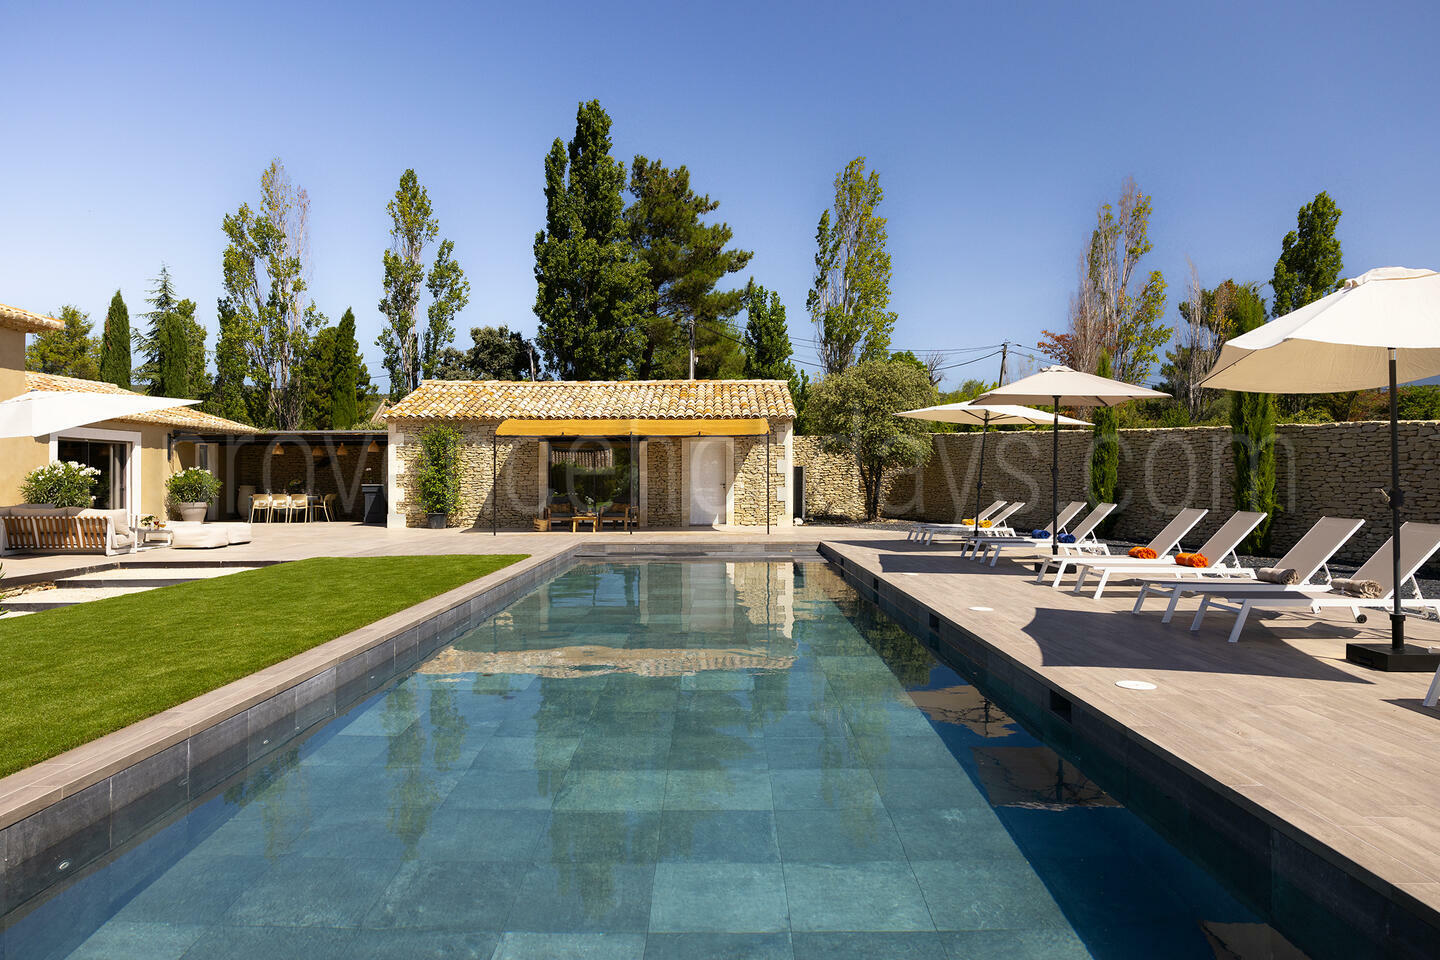 Modern Villa sleeping up to 10 guests in air-conditioned bedrooms, with heated pool 1 - Mas Estelle: Villa: Pool